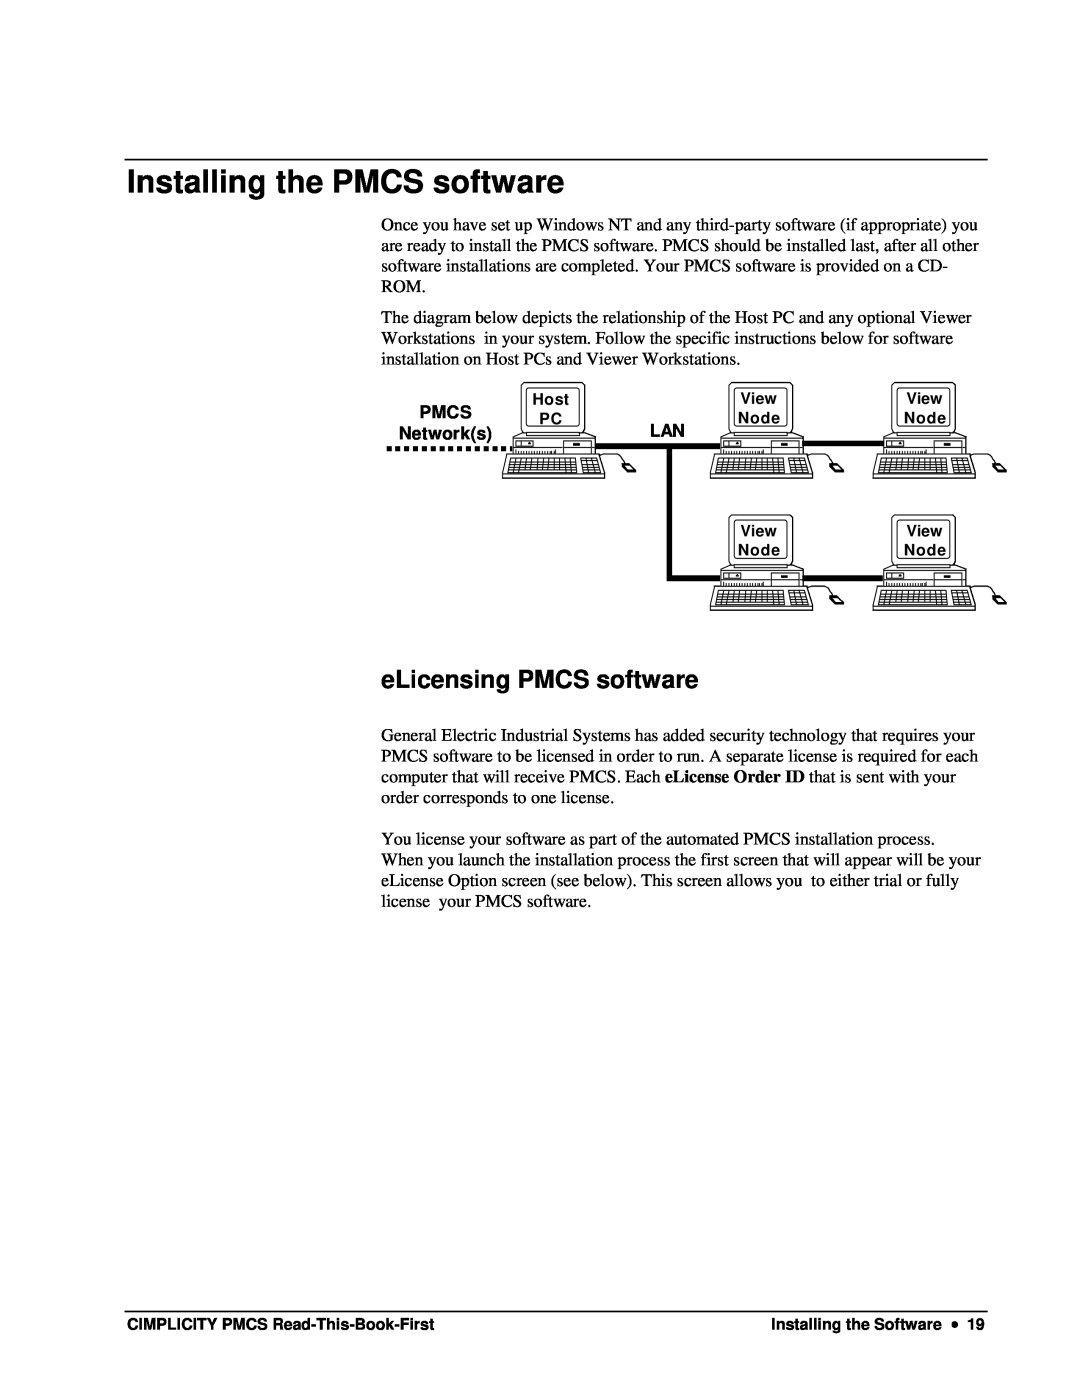 GE DEH-211 manual Installing the PMCS software, eLicensing PMCS software, Pmcs, Networks 